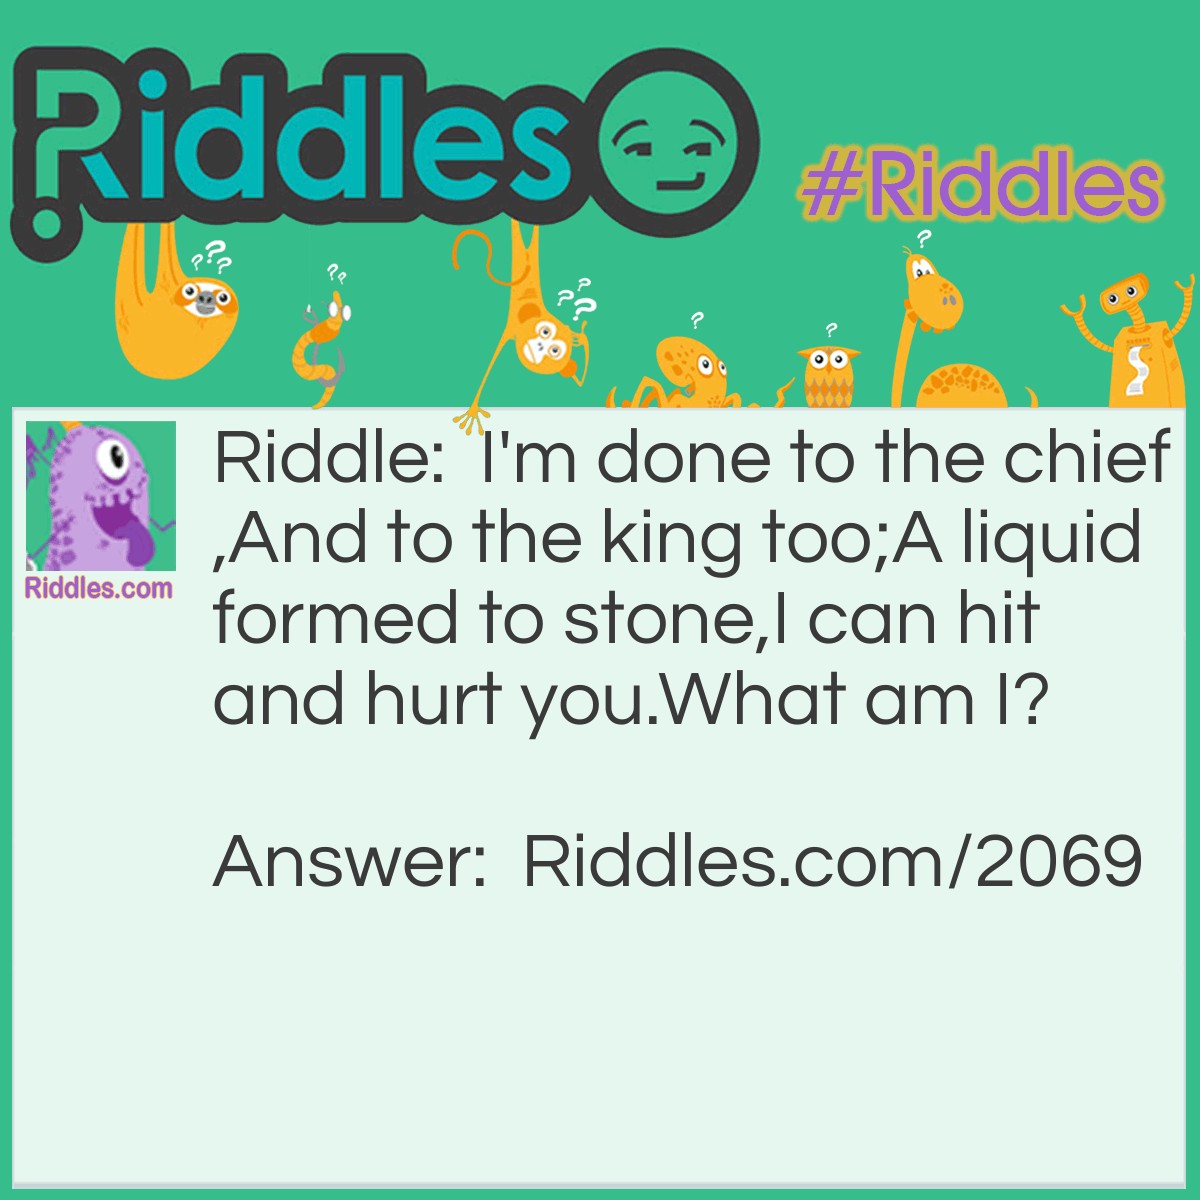 Riddle: I'm done to the chief,
And to the king too;
A liquid formed to stone,
I can hit and hurt you.
What am I? Answer: Hail.